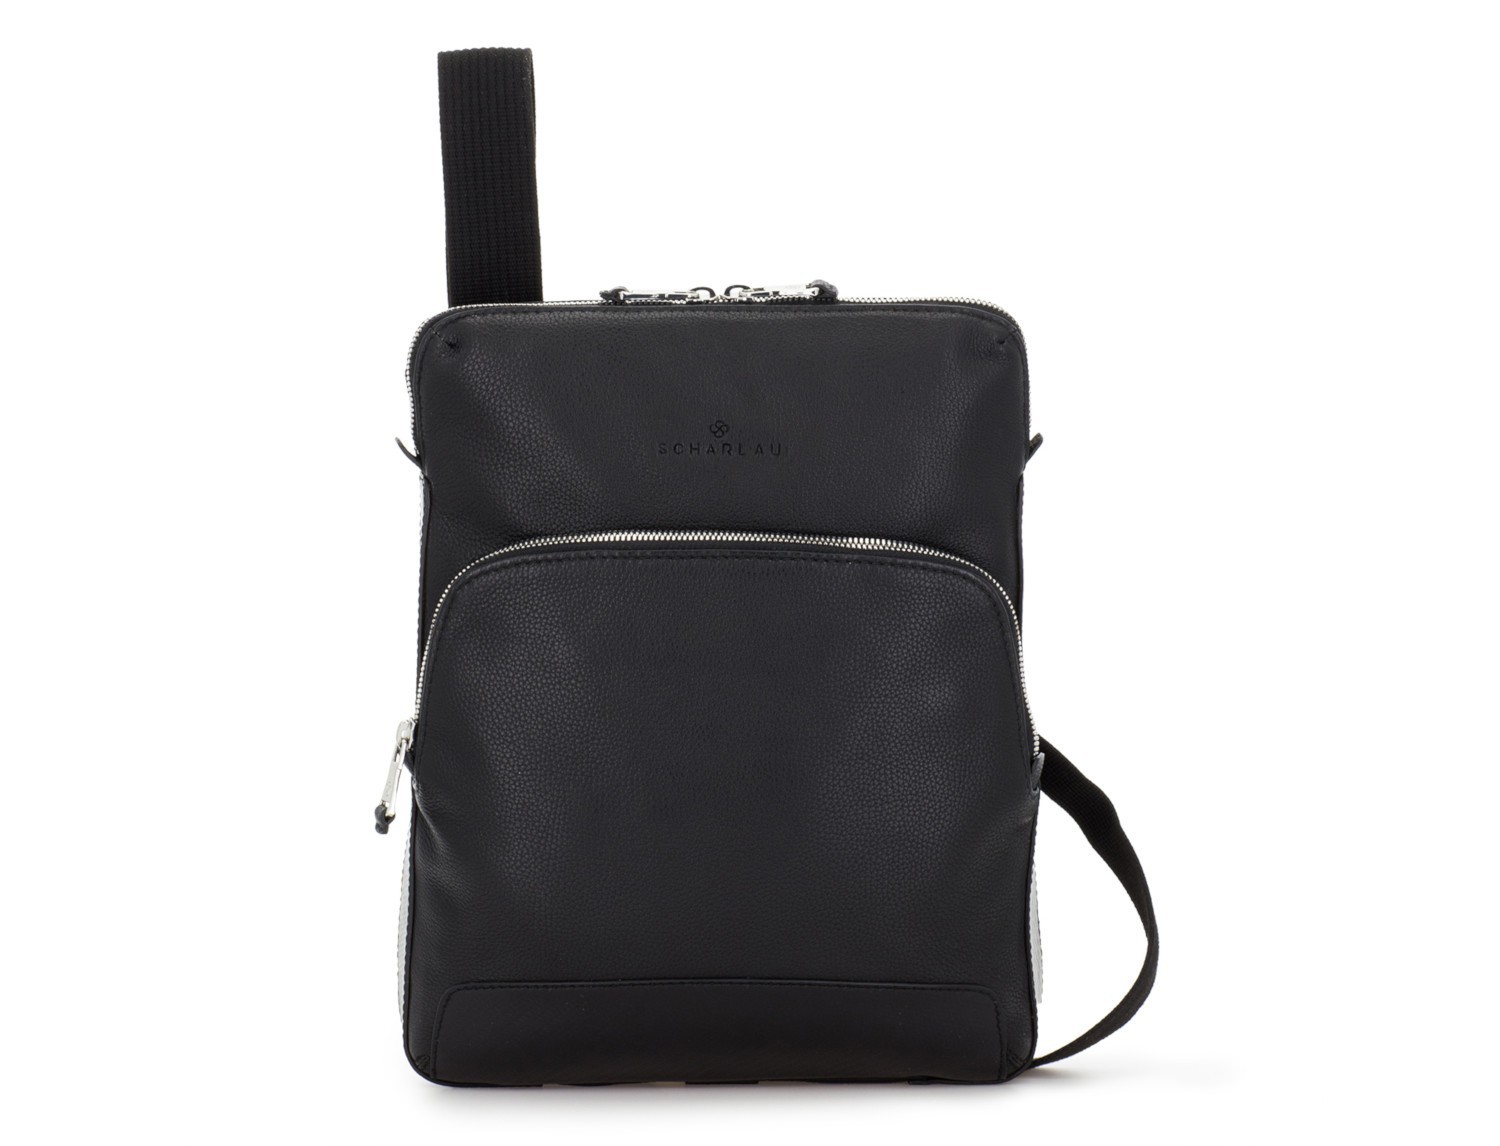 Leather cross body bag black front